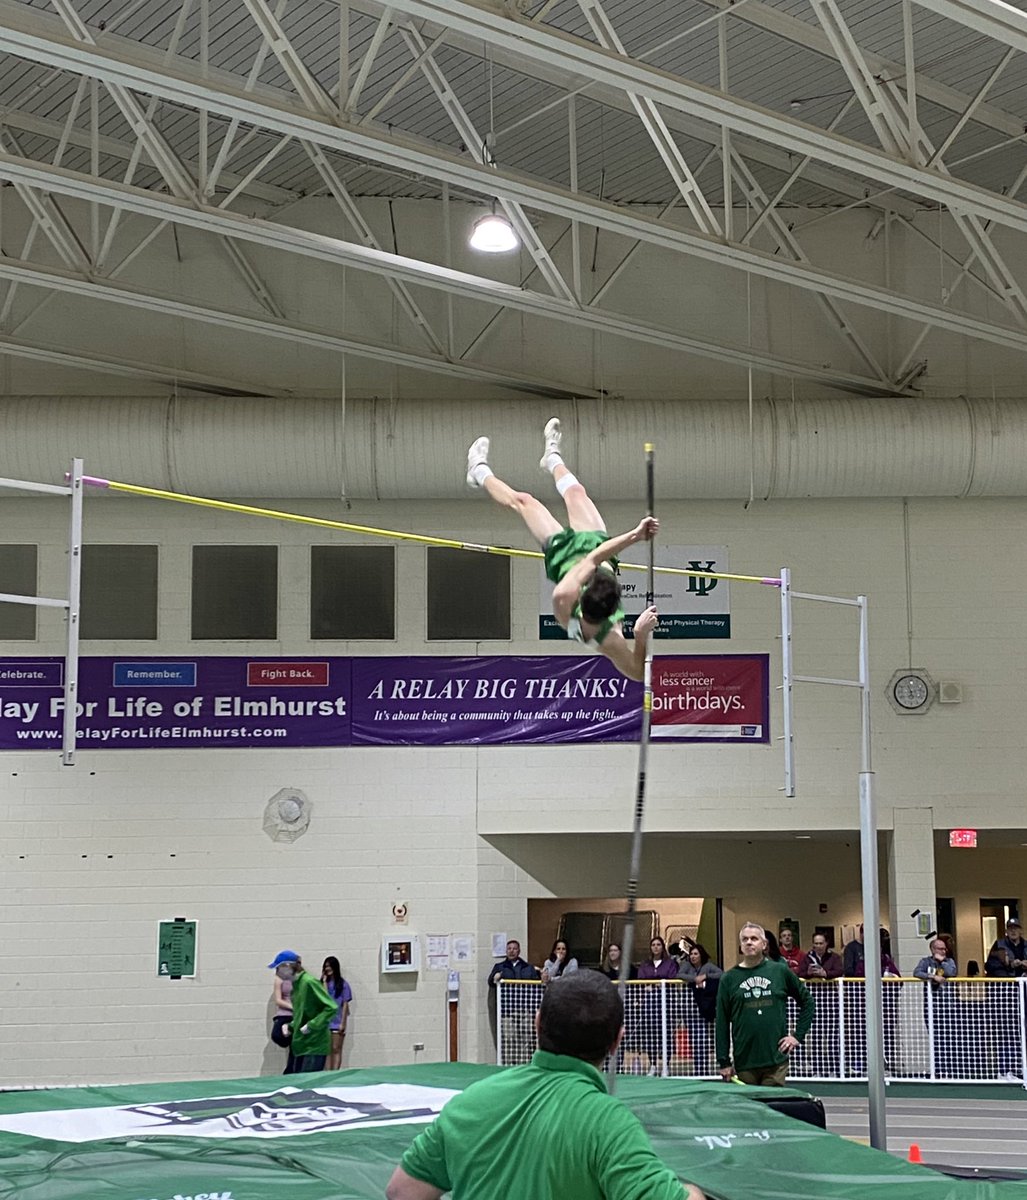 Boys’ Track and Field Today’s invite was not scored. Congrats to the Dukes on numerous outstanding performances, including the 4 X 2 Relay (Glennon, Noble, Valeski, Langley) with a new field house and school record 1:30.40 Nice job Dukes!! @YorkD205